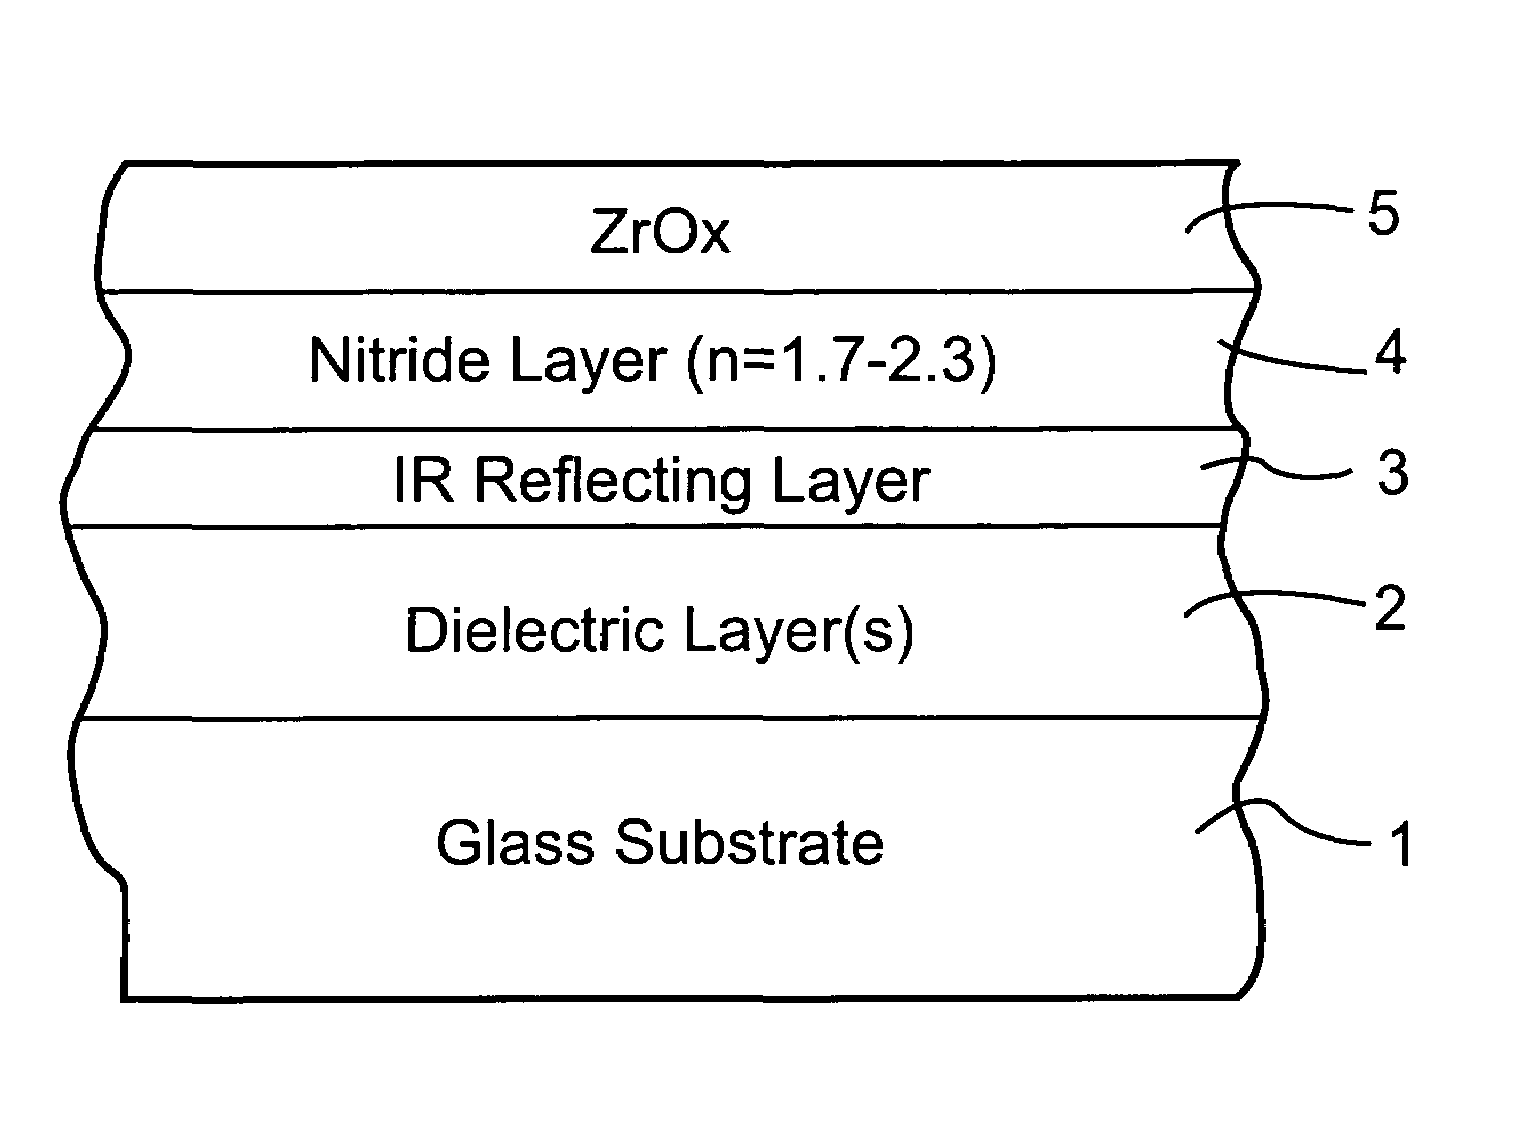 Coated article with dual-layer protective overcoat of nitride and zirconium or chromium oxide